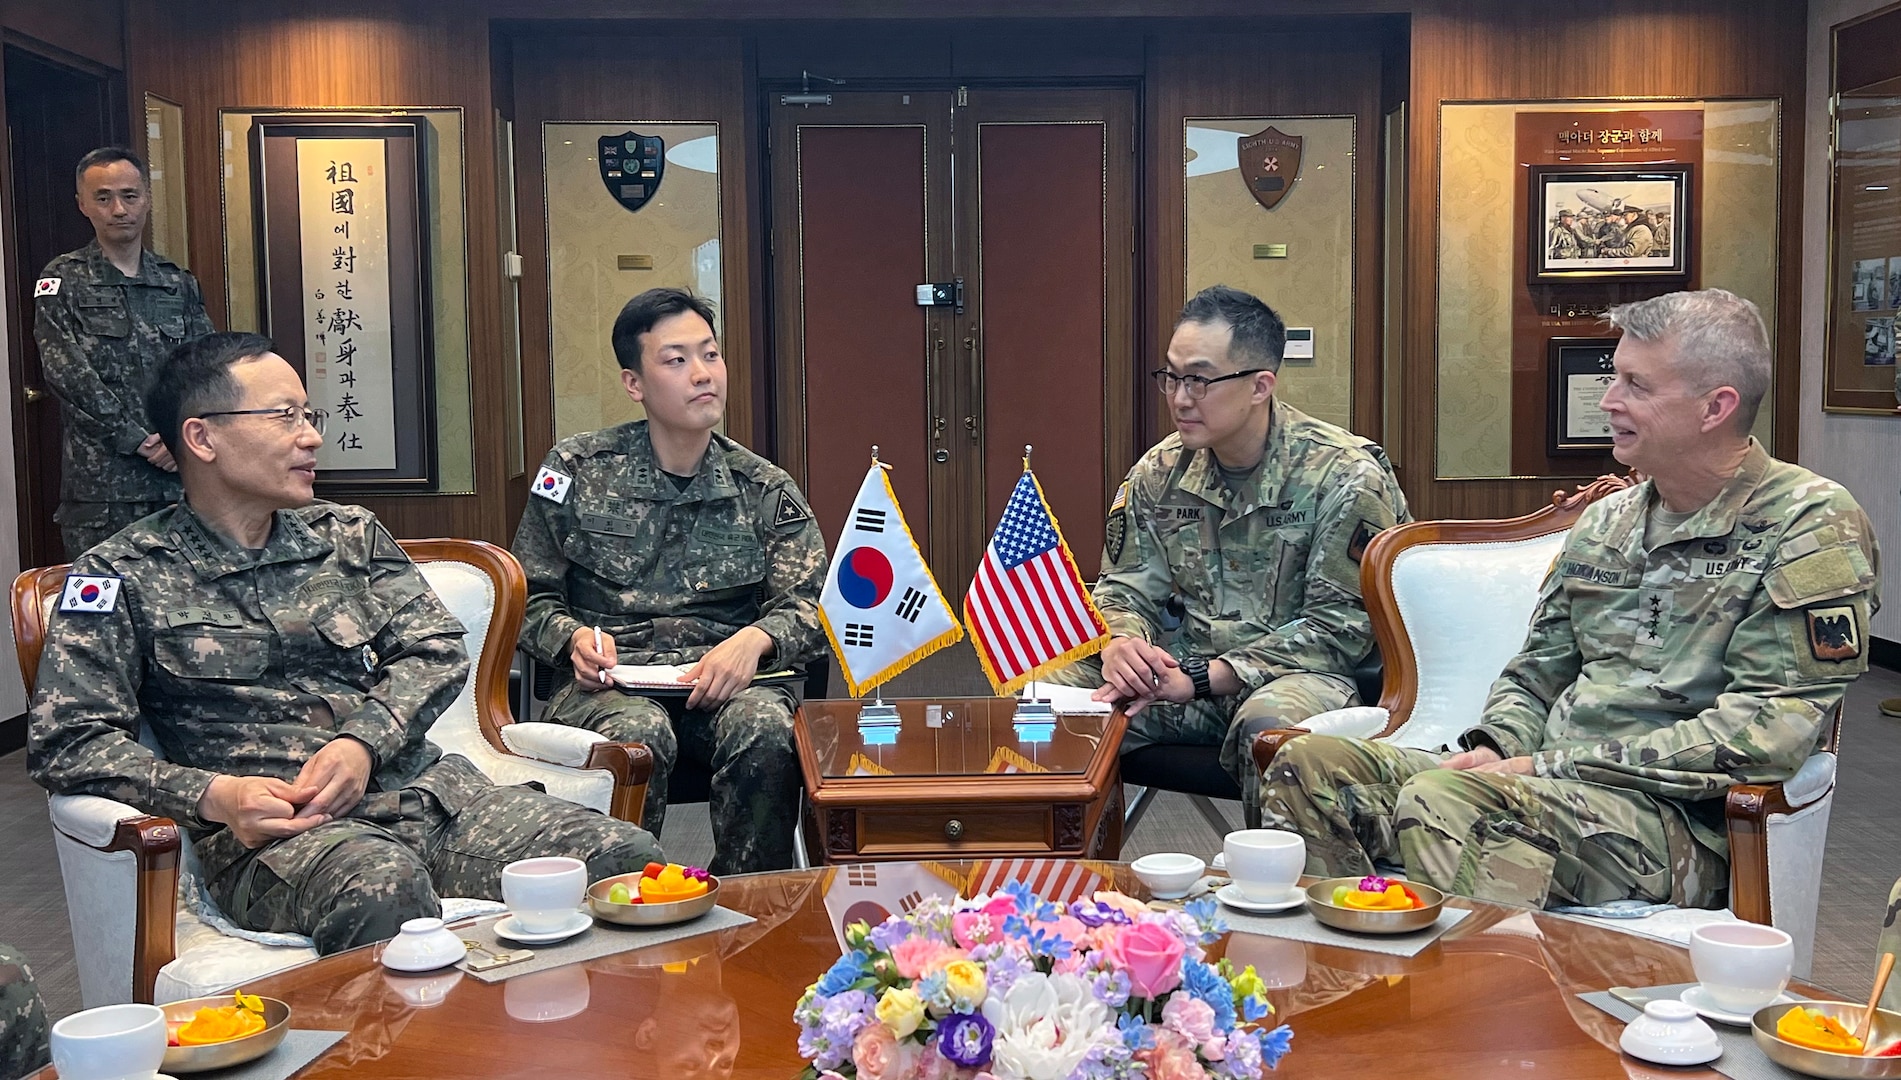 Army Gen. Daniel Hokanson, chief, National Guard Bureau, visits  the Republic of South Korea to assess potential National Guard contributions at a time of deepening U.S. and ROK defense and security ties, May 16, 2023. This image was acquired using a cellular device. (U.S. Army National Guard photo by Master Sgt. Jim Greenhill)